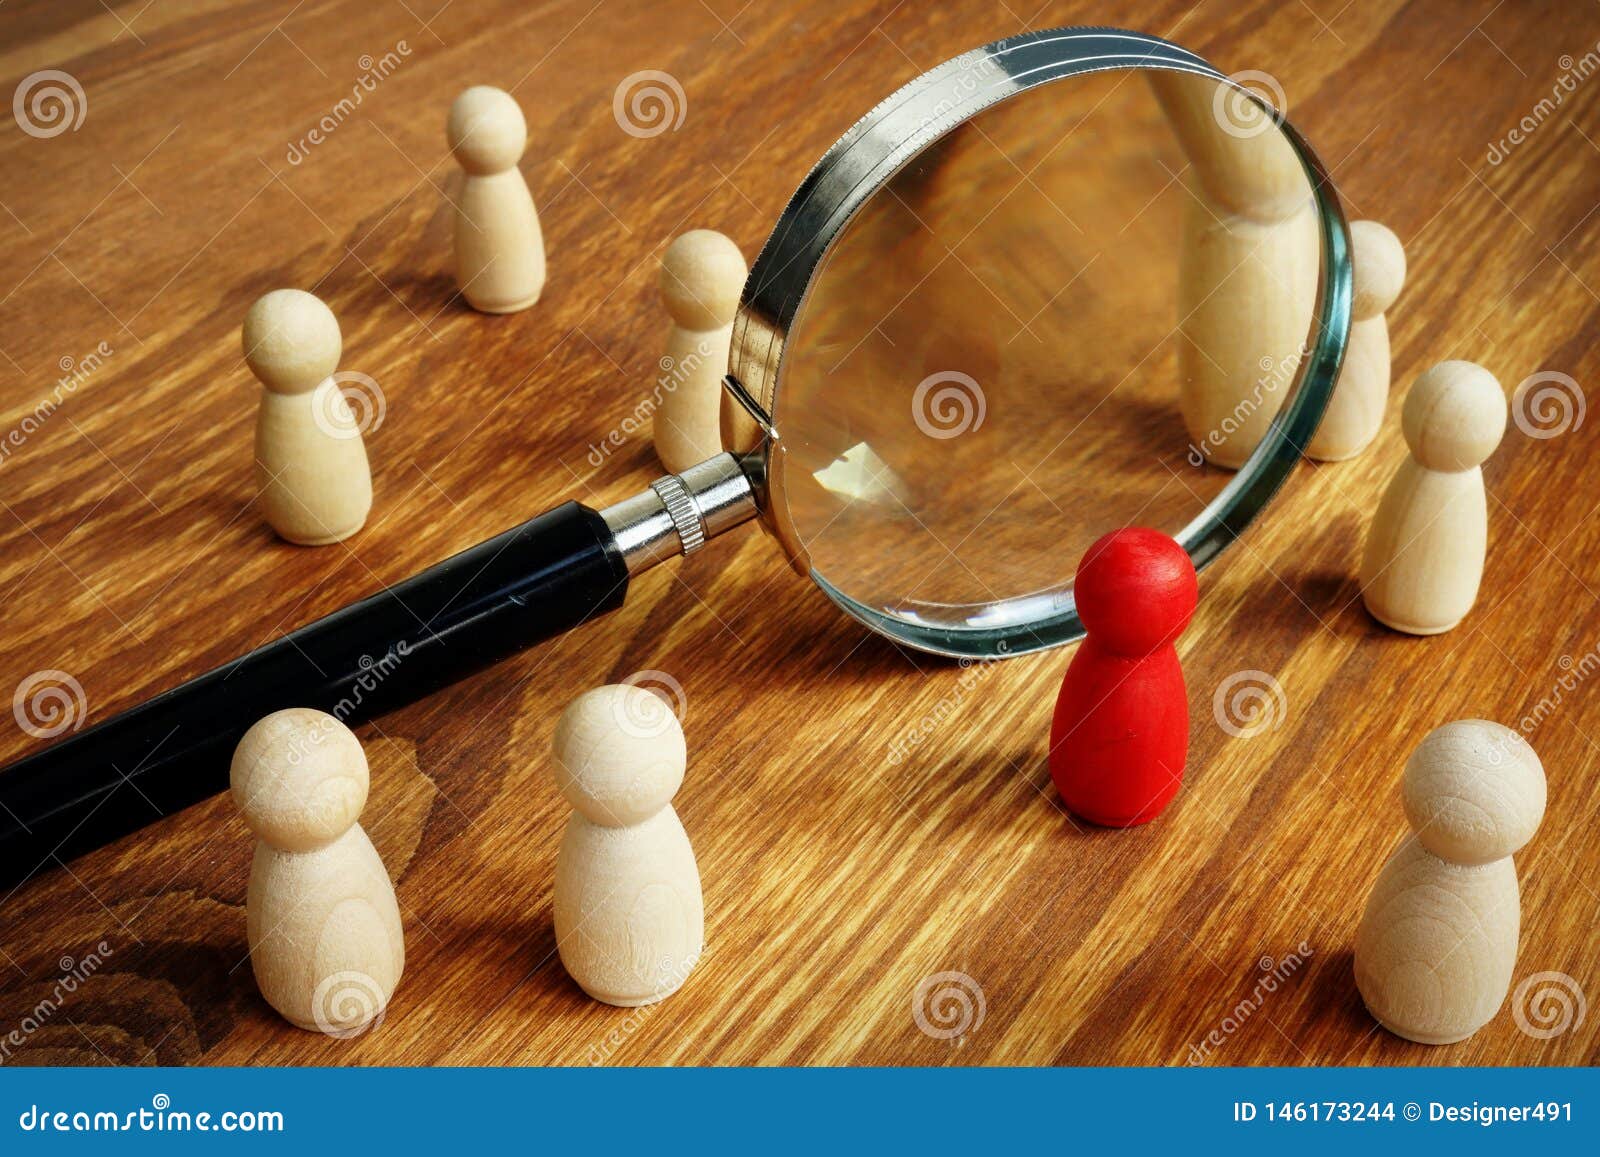 talent acquisition and management. magnifying glass and figurines